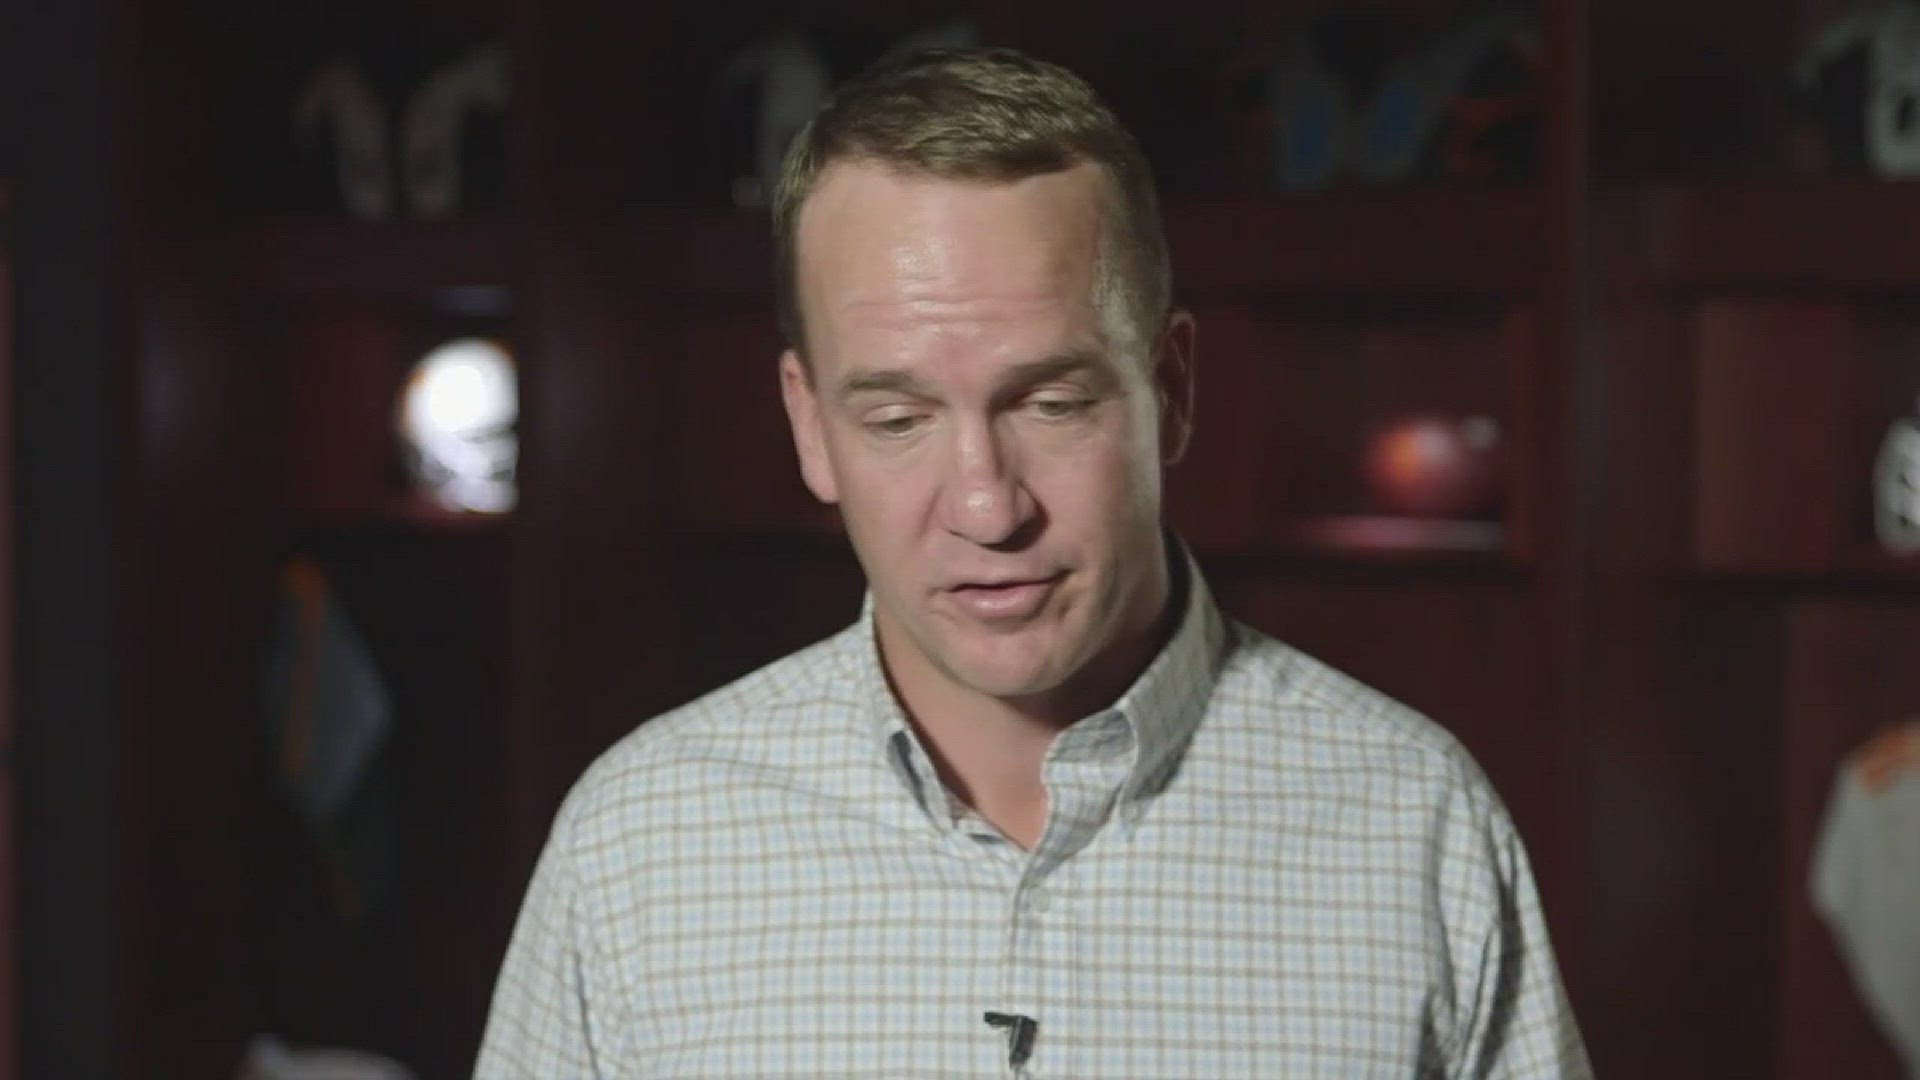 Peyton Manning is back in Knoxville for the Tennessee-Georgia game. He doesn't like being asked to analyze Tennessee football. He says he's a fan and is behind Butch Jones.